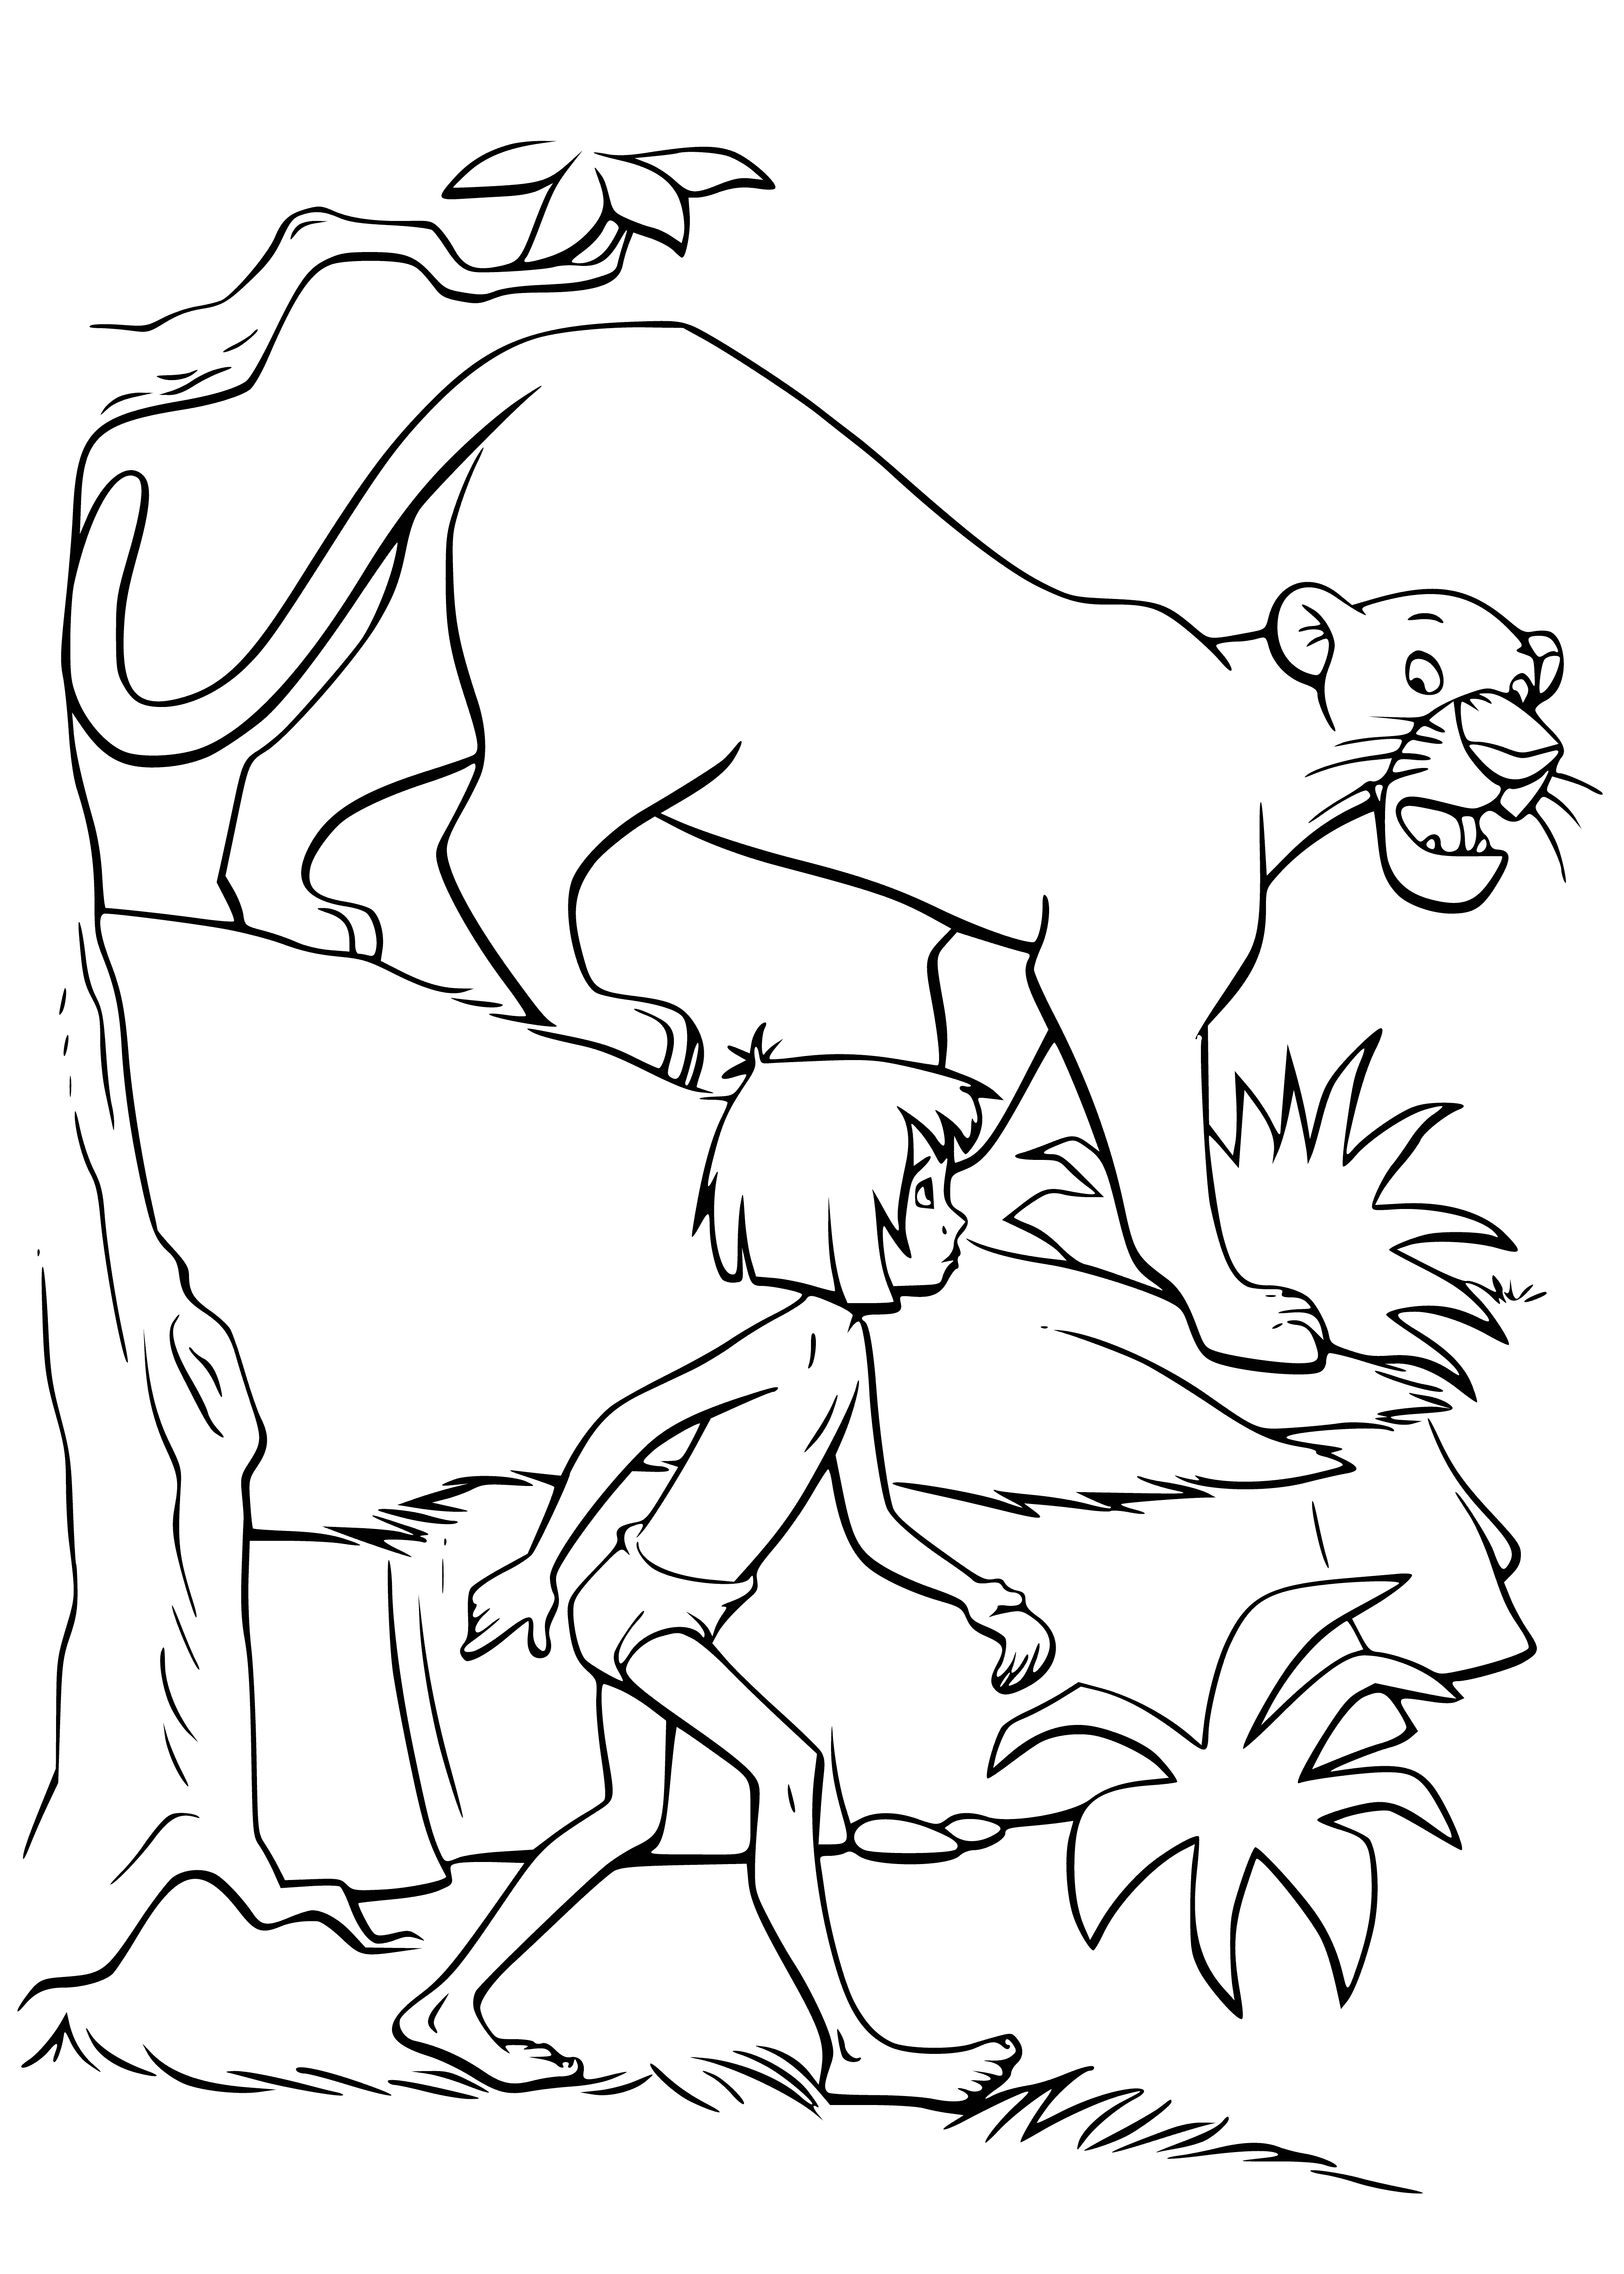 coloring page: Boy is standing on left, tiger stalking on right; scene is set for suspenseful showdown! #coloringpage #tree #jungle #boy #tiger